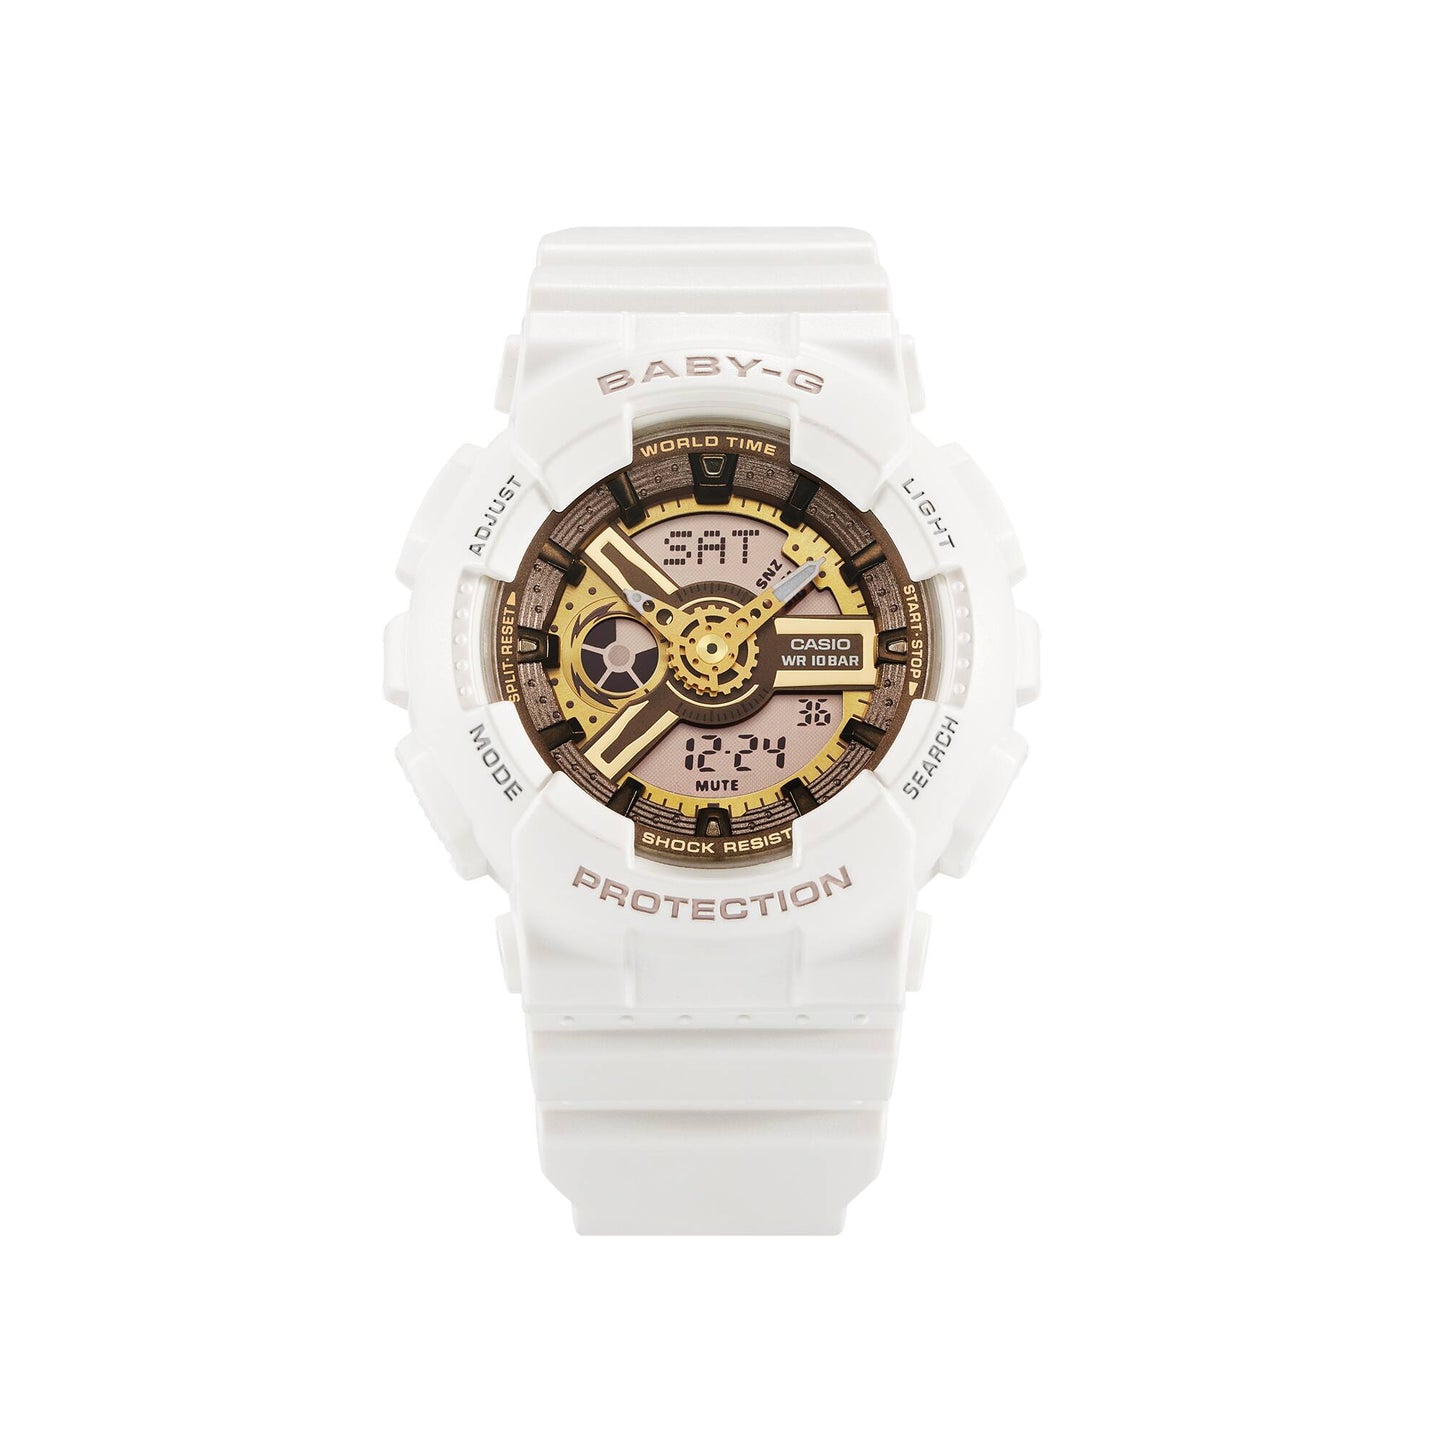 CASIO LOVER'S COLLECTION BABY-G / G-SHOCK LOV-22A-7A